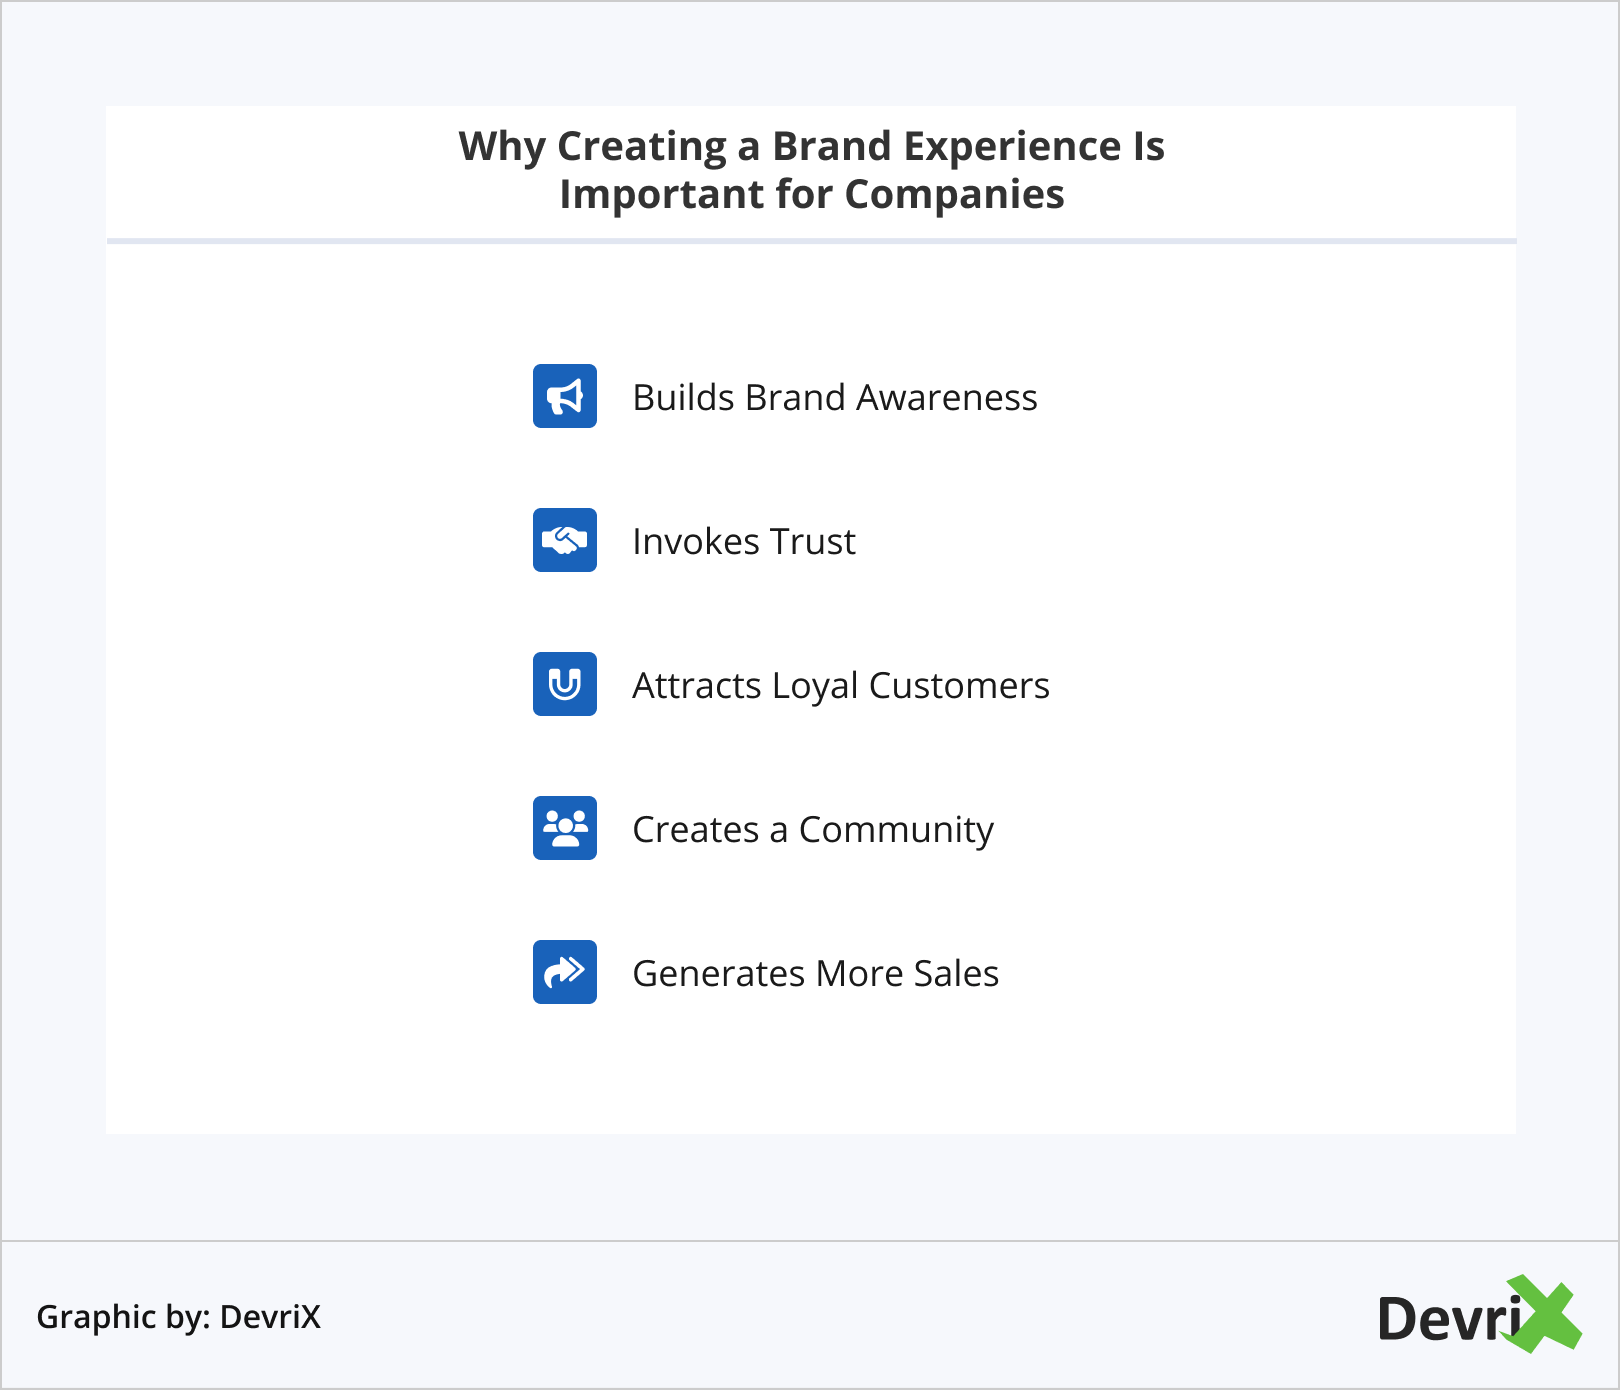 Why Creating a Brand Experience Is Important for Companies